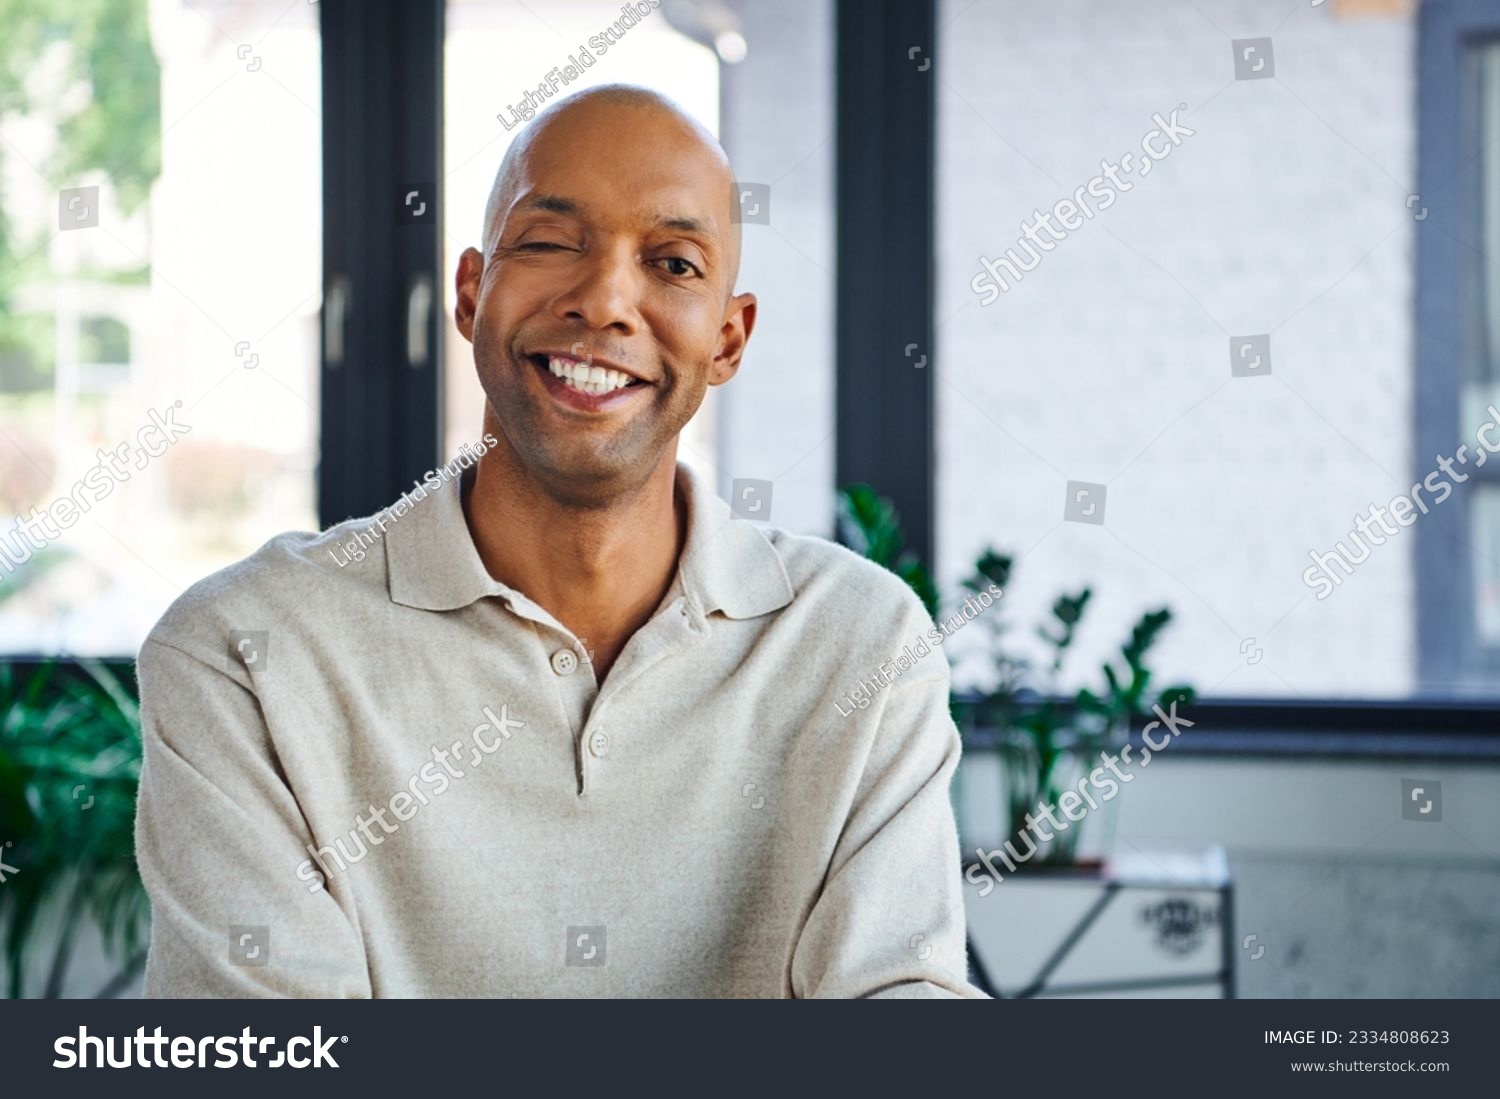 professional headshots, cheerful dark skinned man with myasthenia gravis disease looking at camera, happy office worker with eye syndrome, inclusion and diversity #2334808623